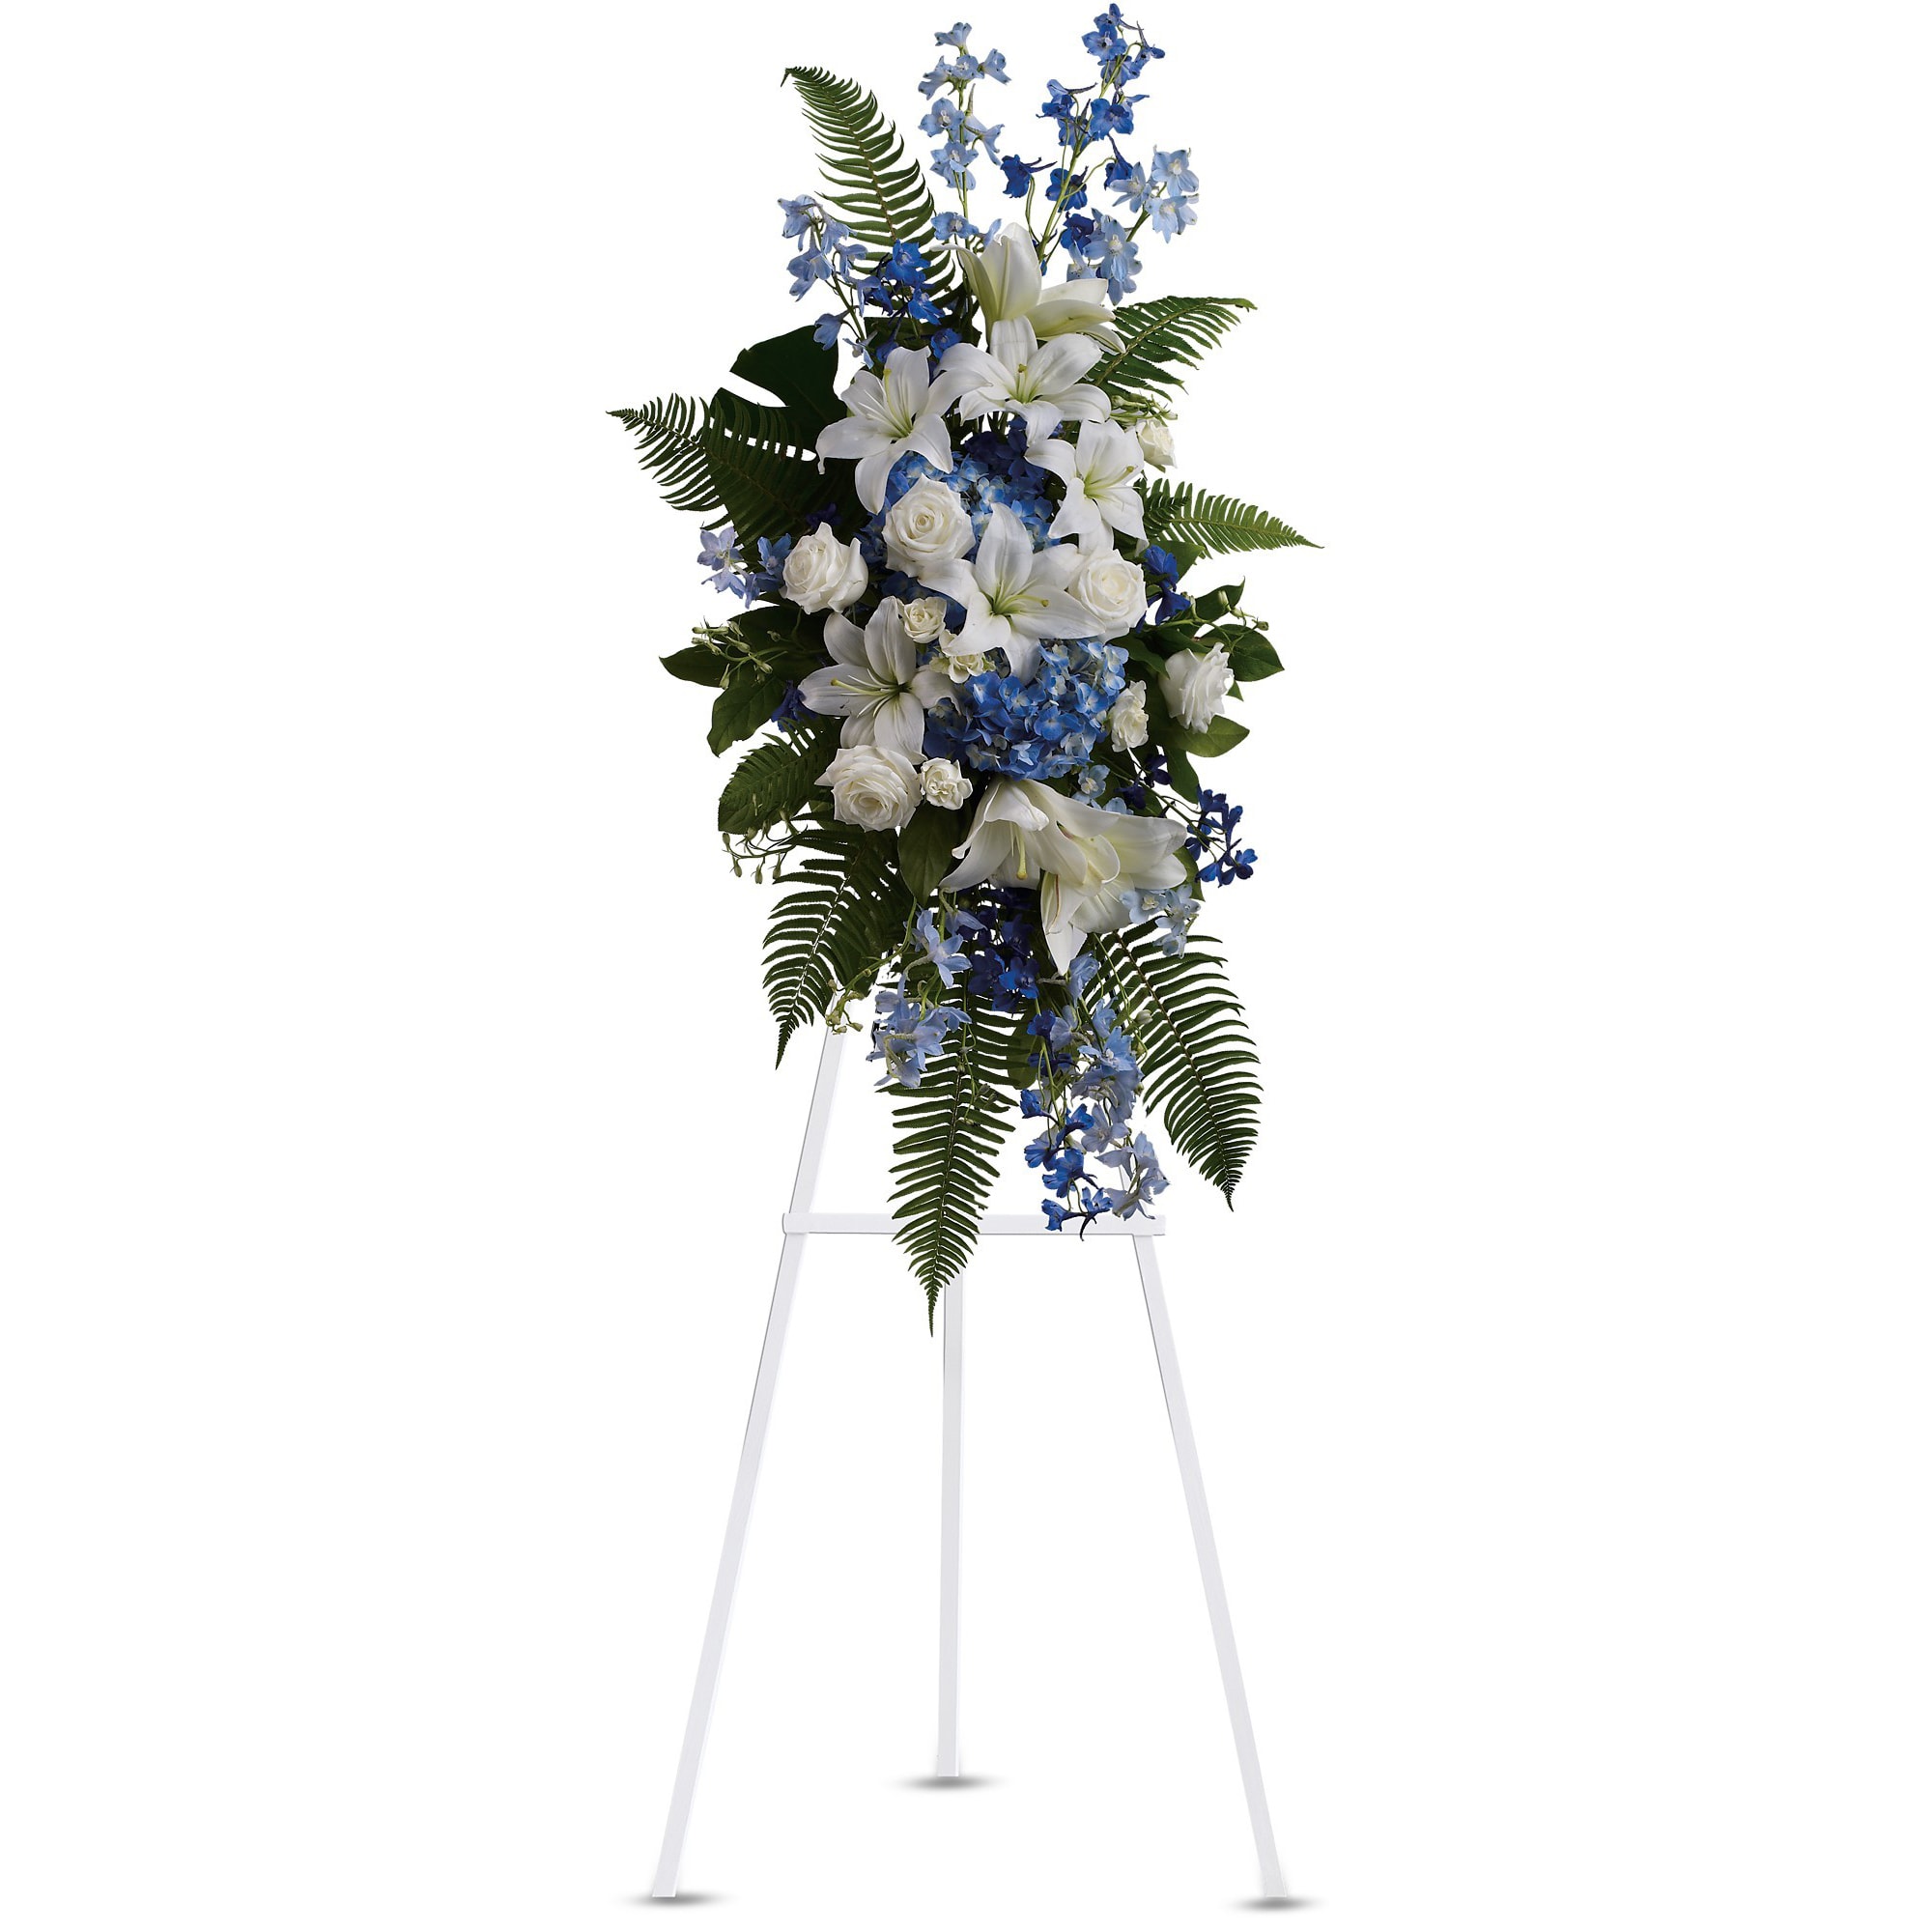 Ocean Breeze Spray by Teleflora - Express deep condolences and strong hopes for the future with an elegant tribute that conveys admiration, affection and respect. 